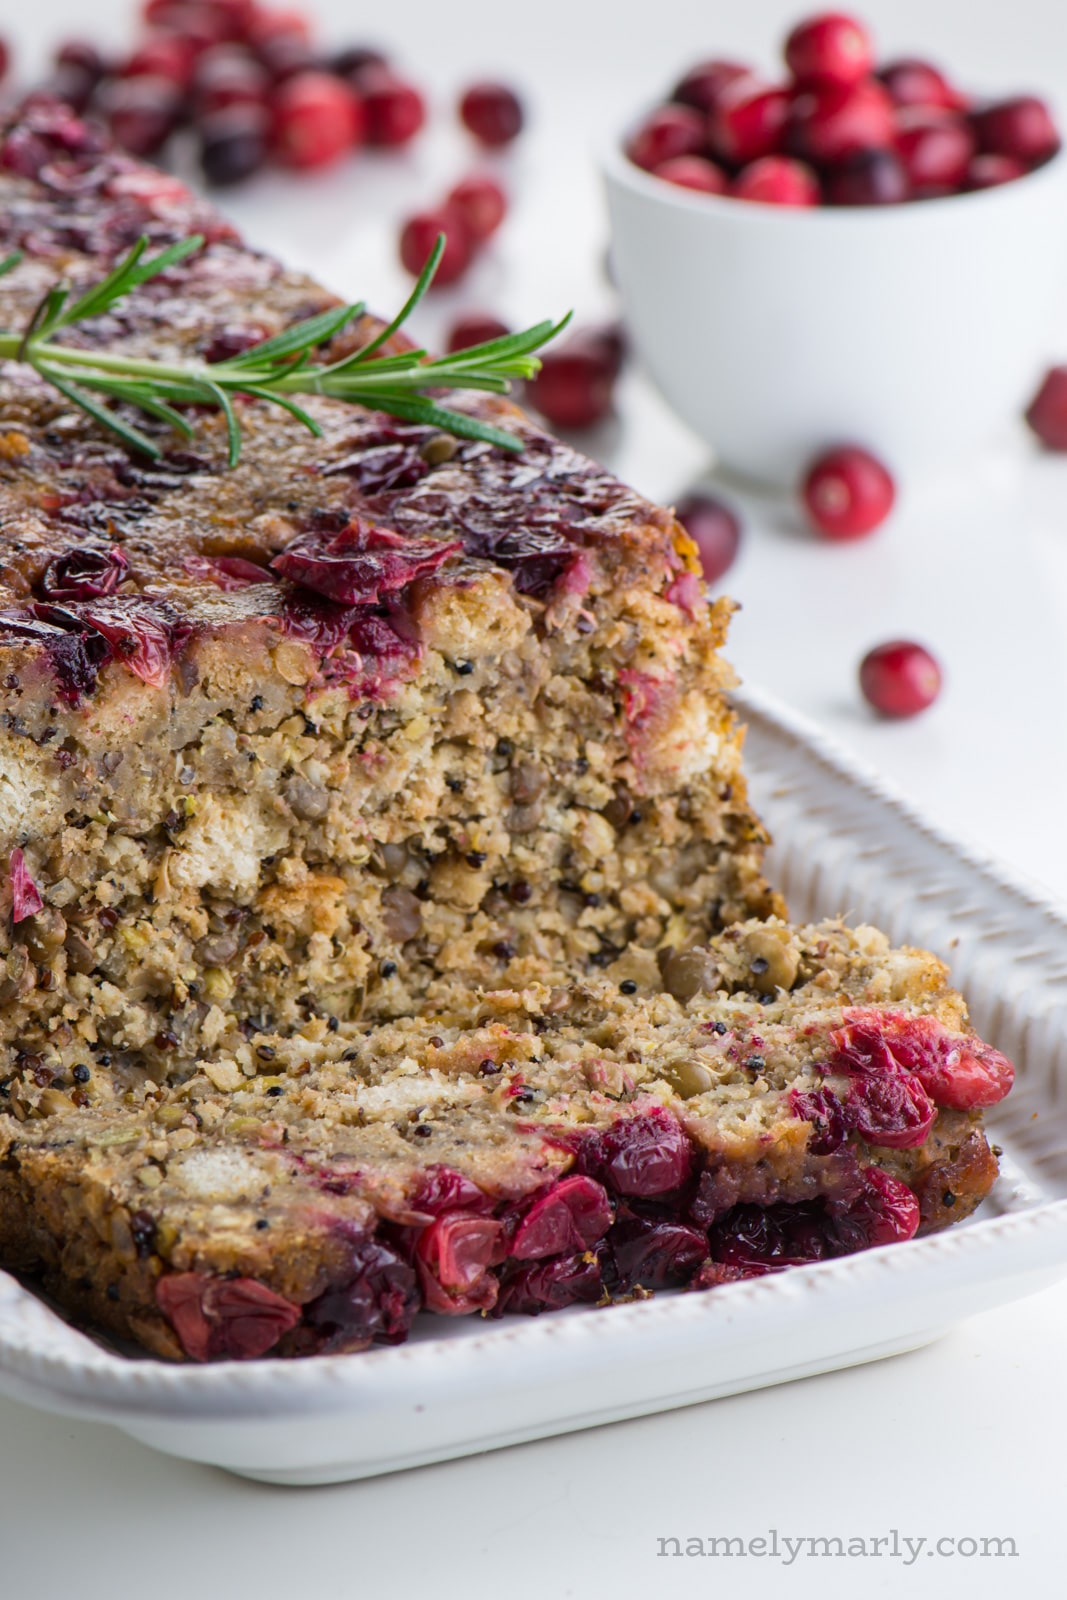 A slice of Vegan Lentil Loaf on a plate in front of the remaining loaf with a small bowl of cranberries in the back.